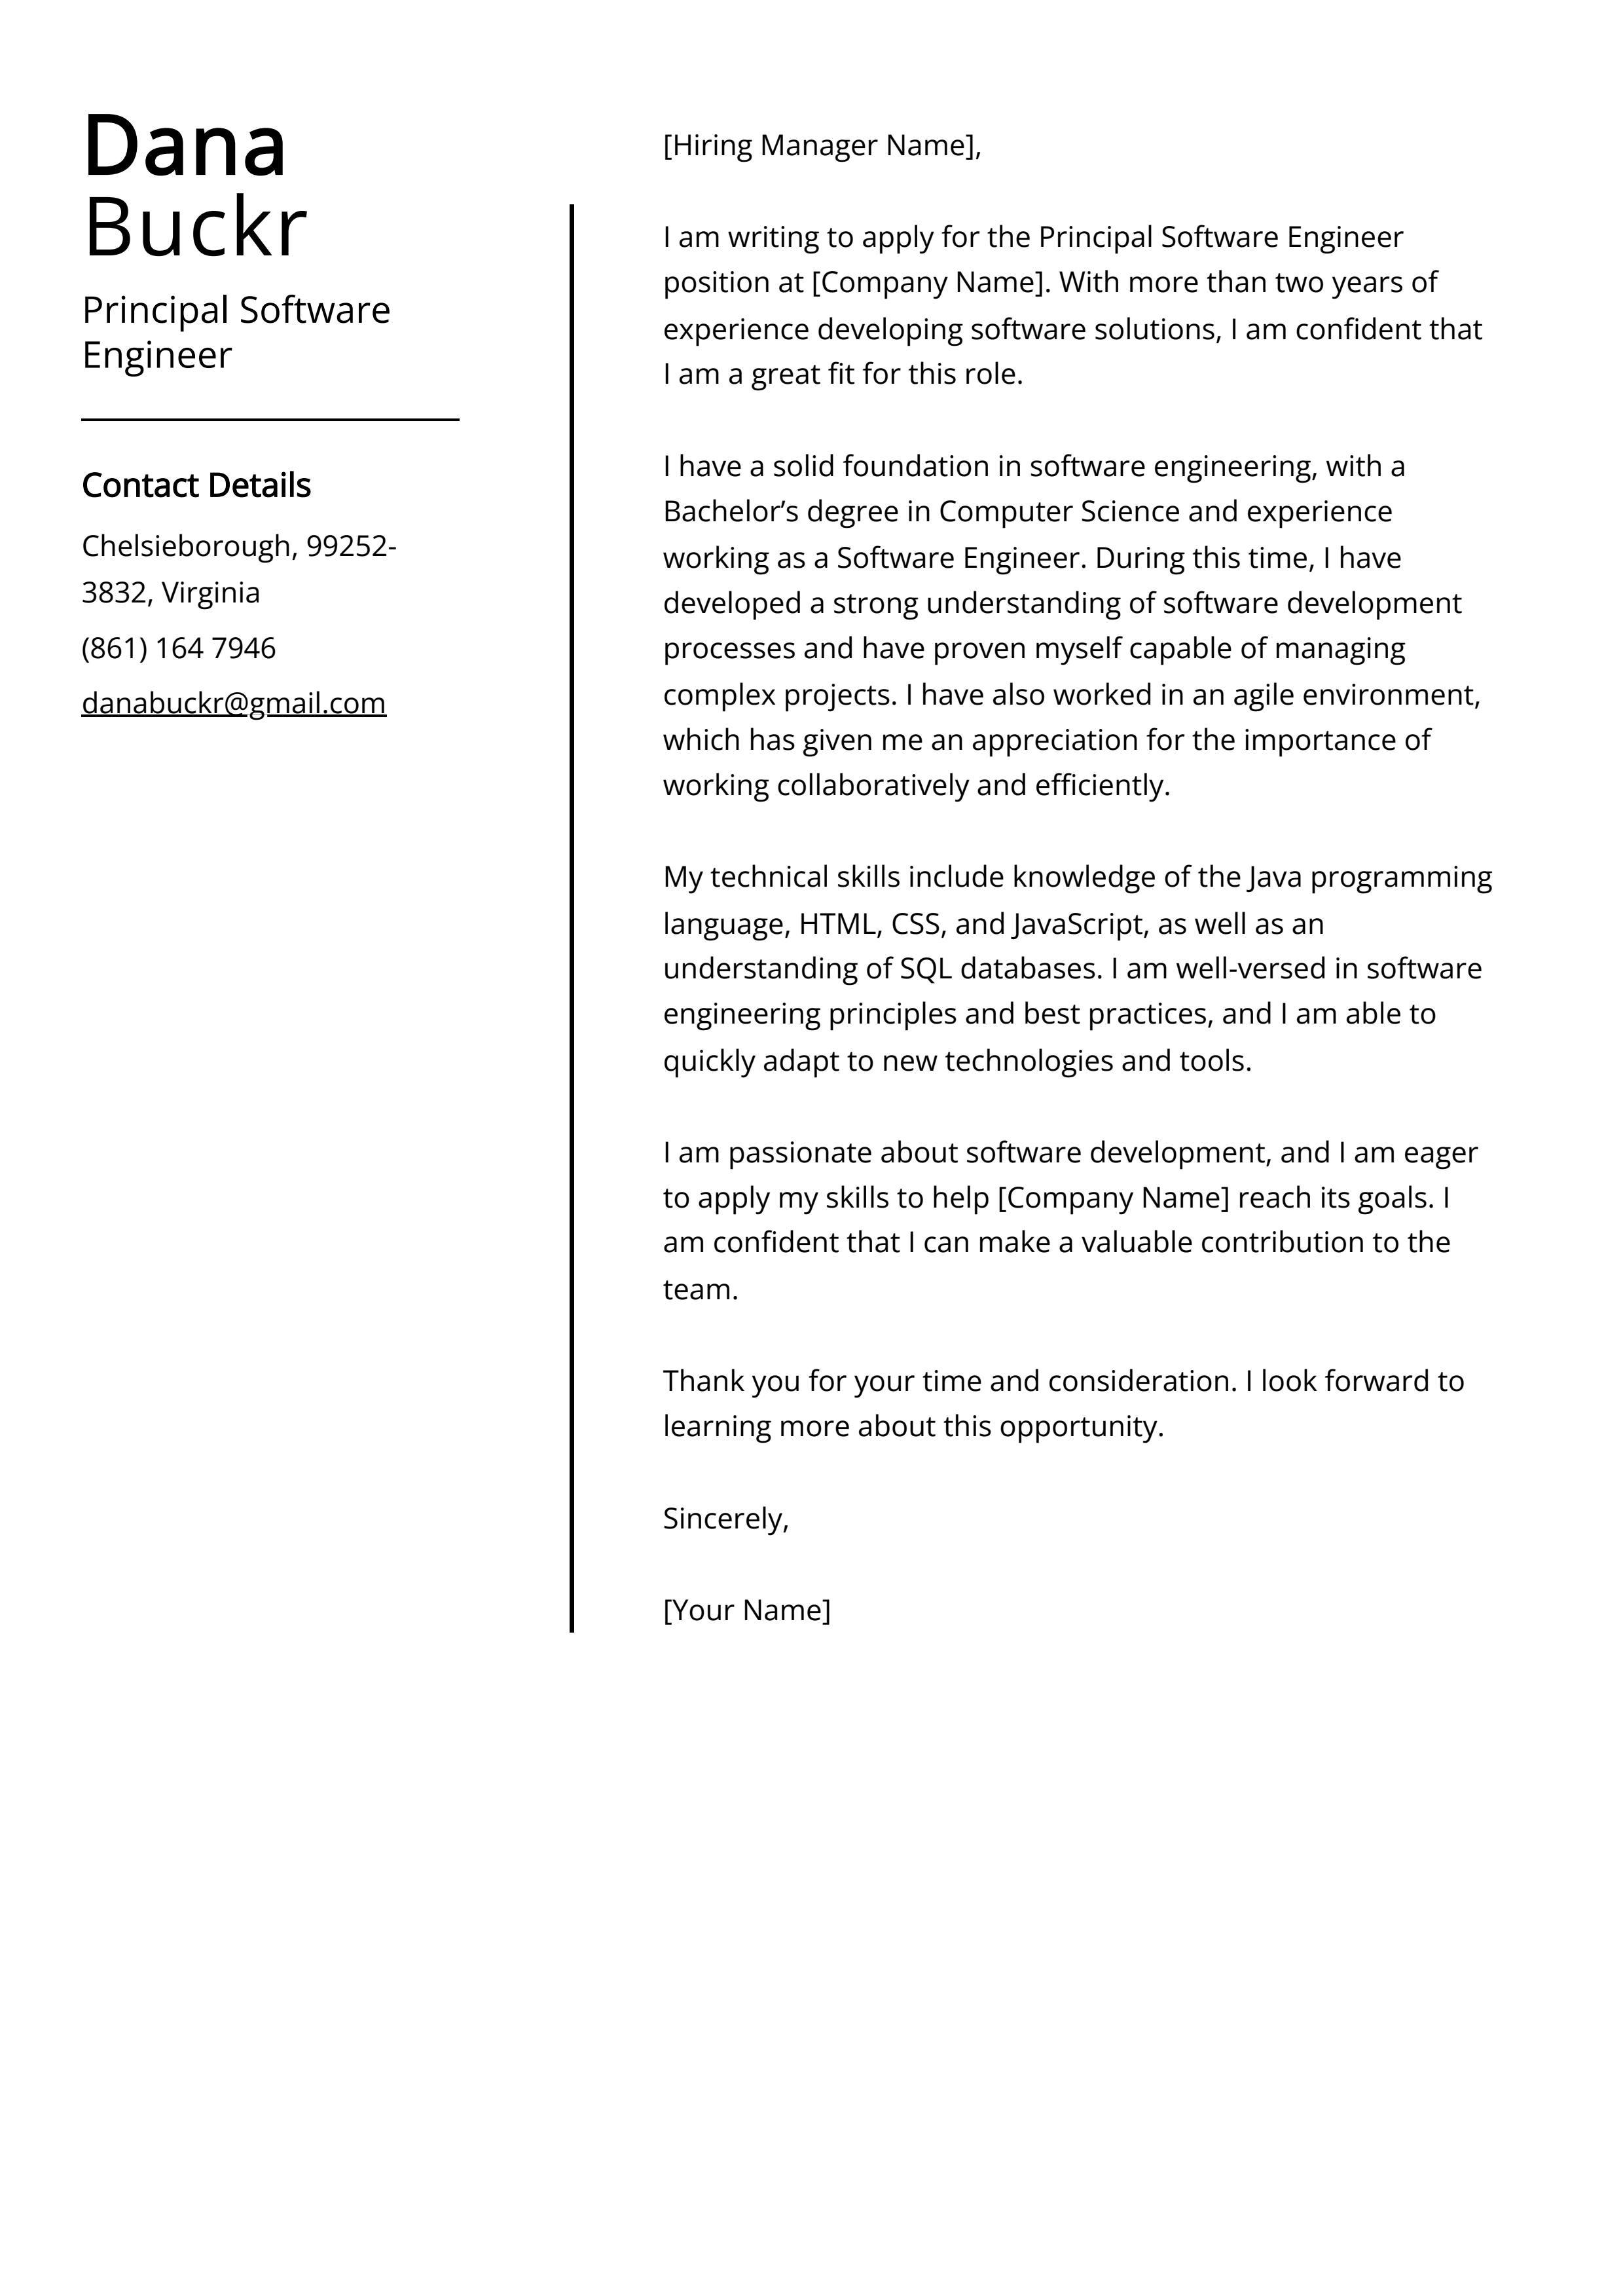 Principal Software Engineer Cover Letter Example